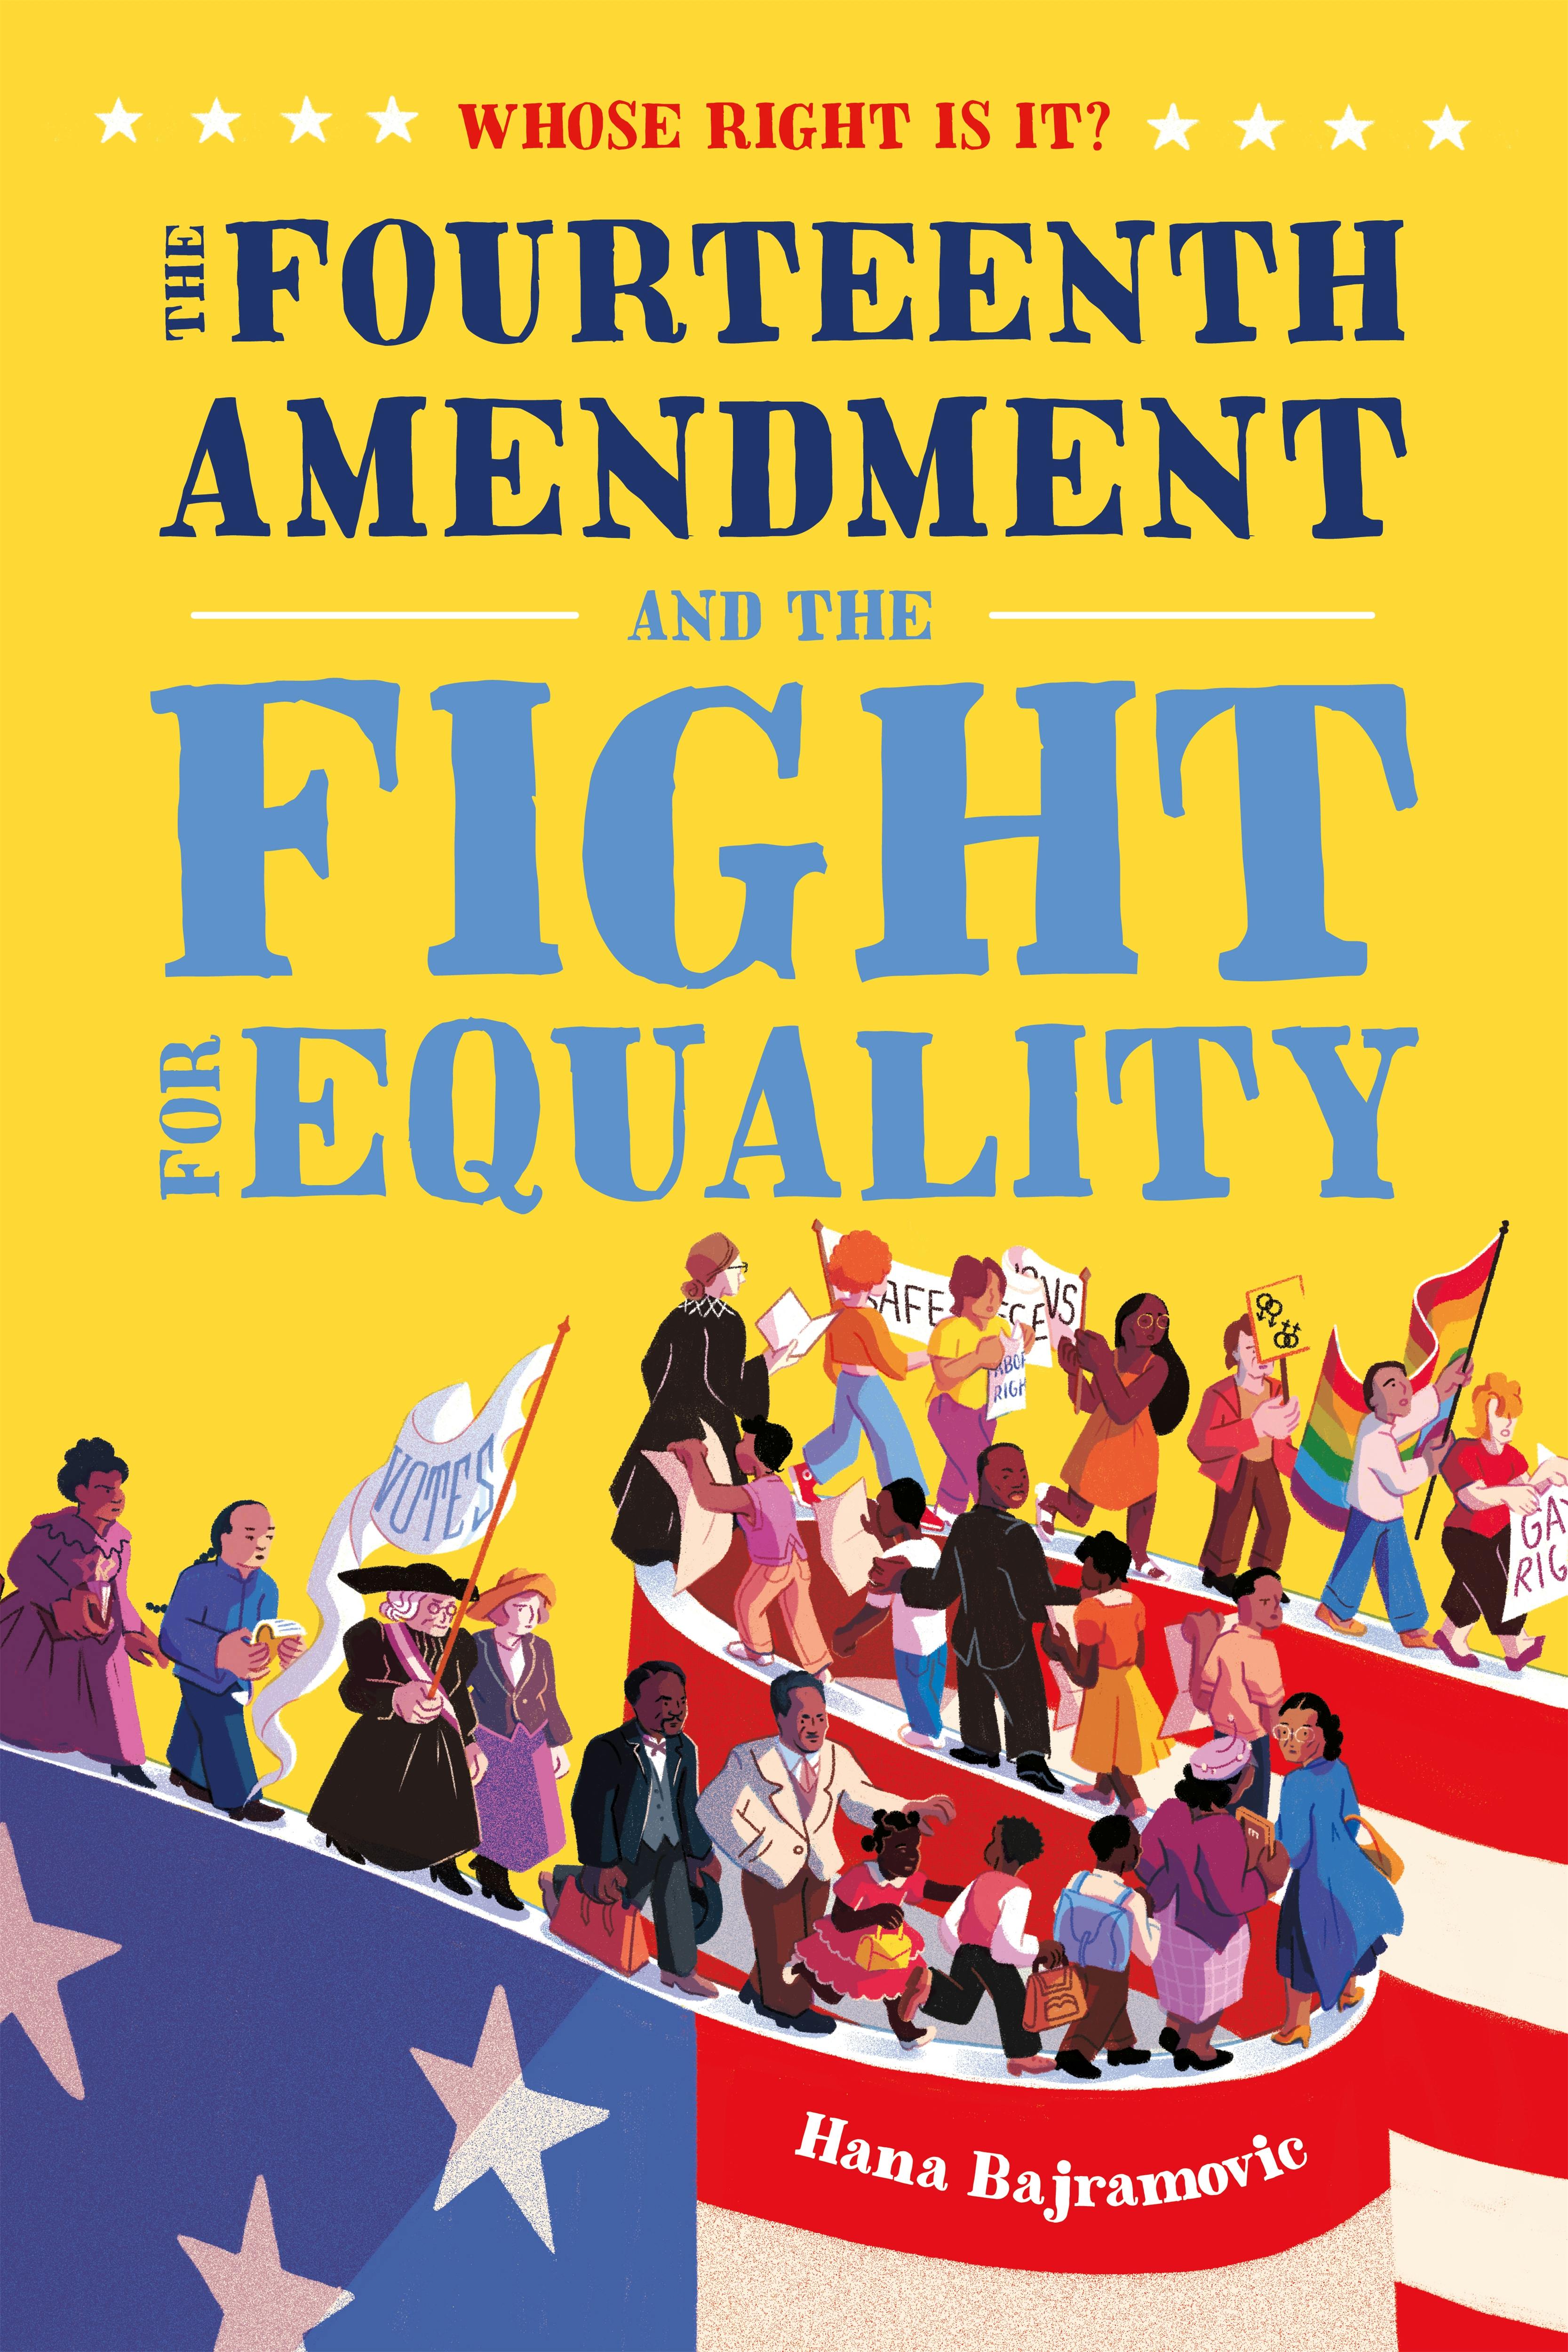 Whose Right Is It? The Fourteenth Amendment and the for Equality